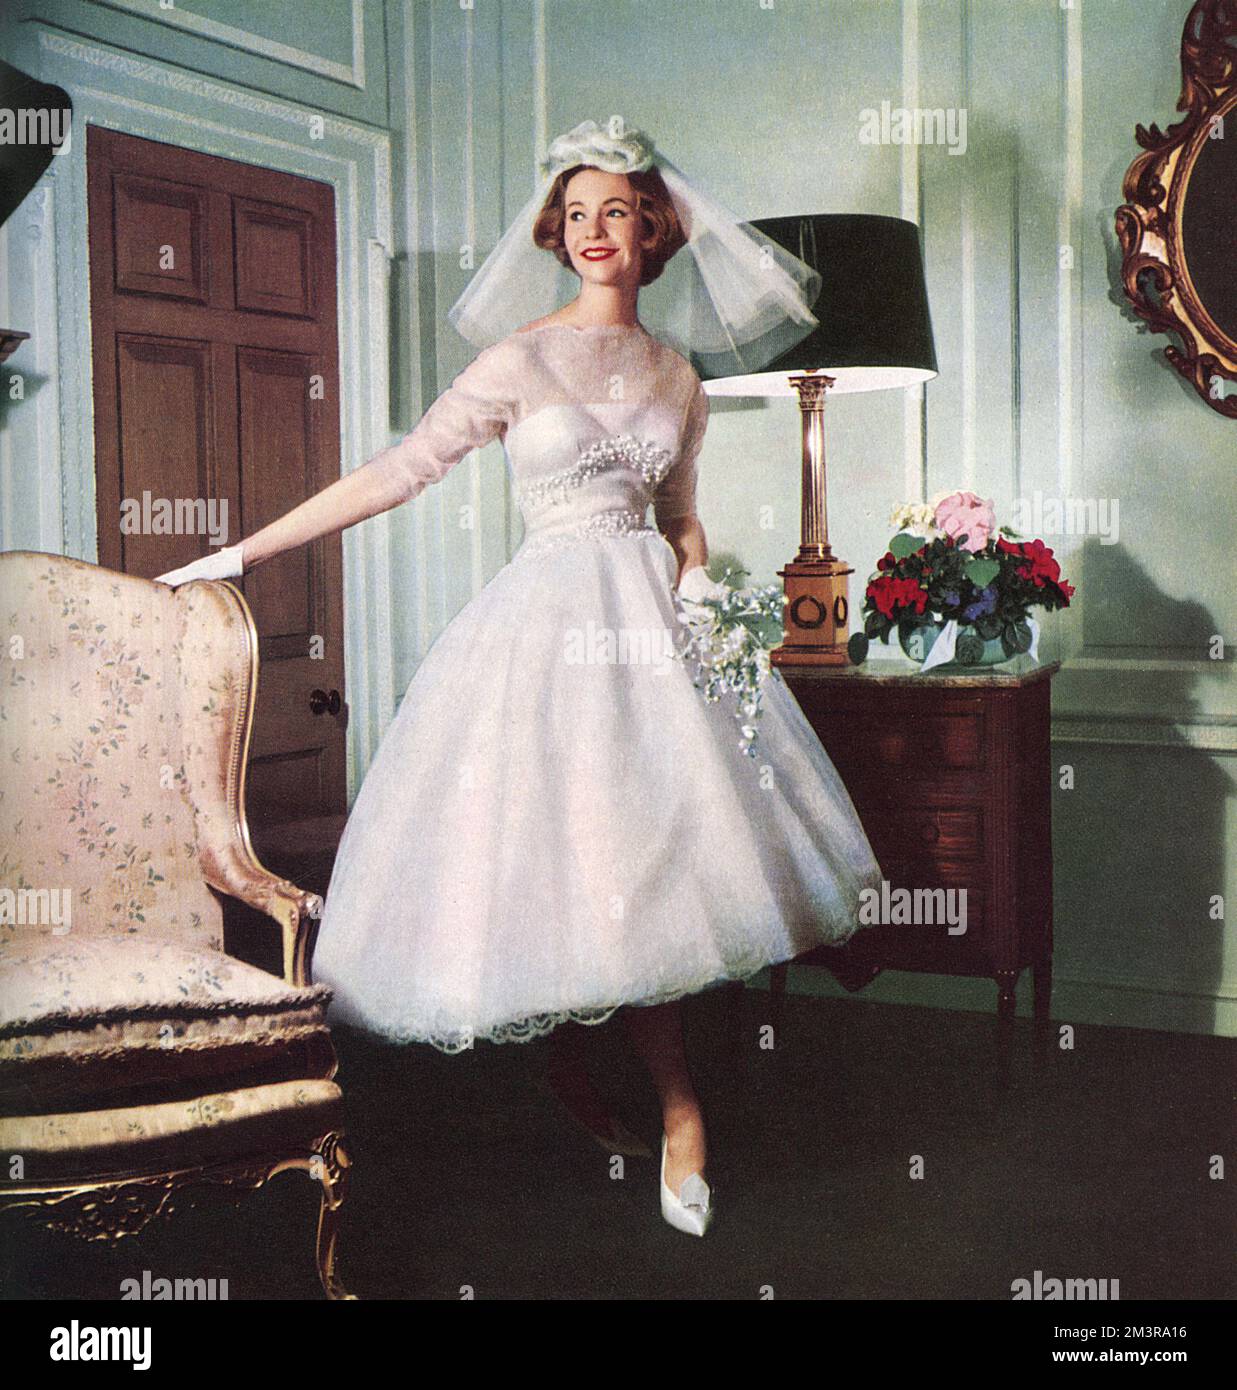 A high fashion wedding dress in lace tinted with the merest pink, short enough in front to show a stocking and slippered foot.  By Carina Martin from Harrods Trousseau room worn with an organza rose headdress and satin Dior shoes.       Date: 1958 Stock Photo